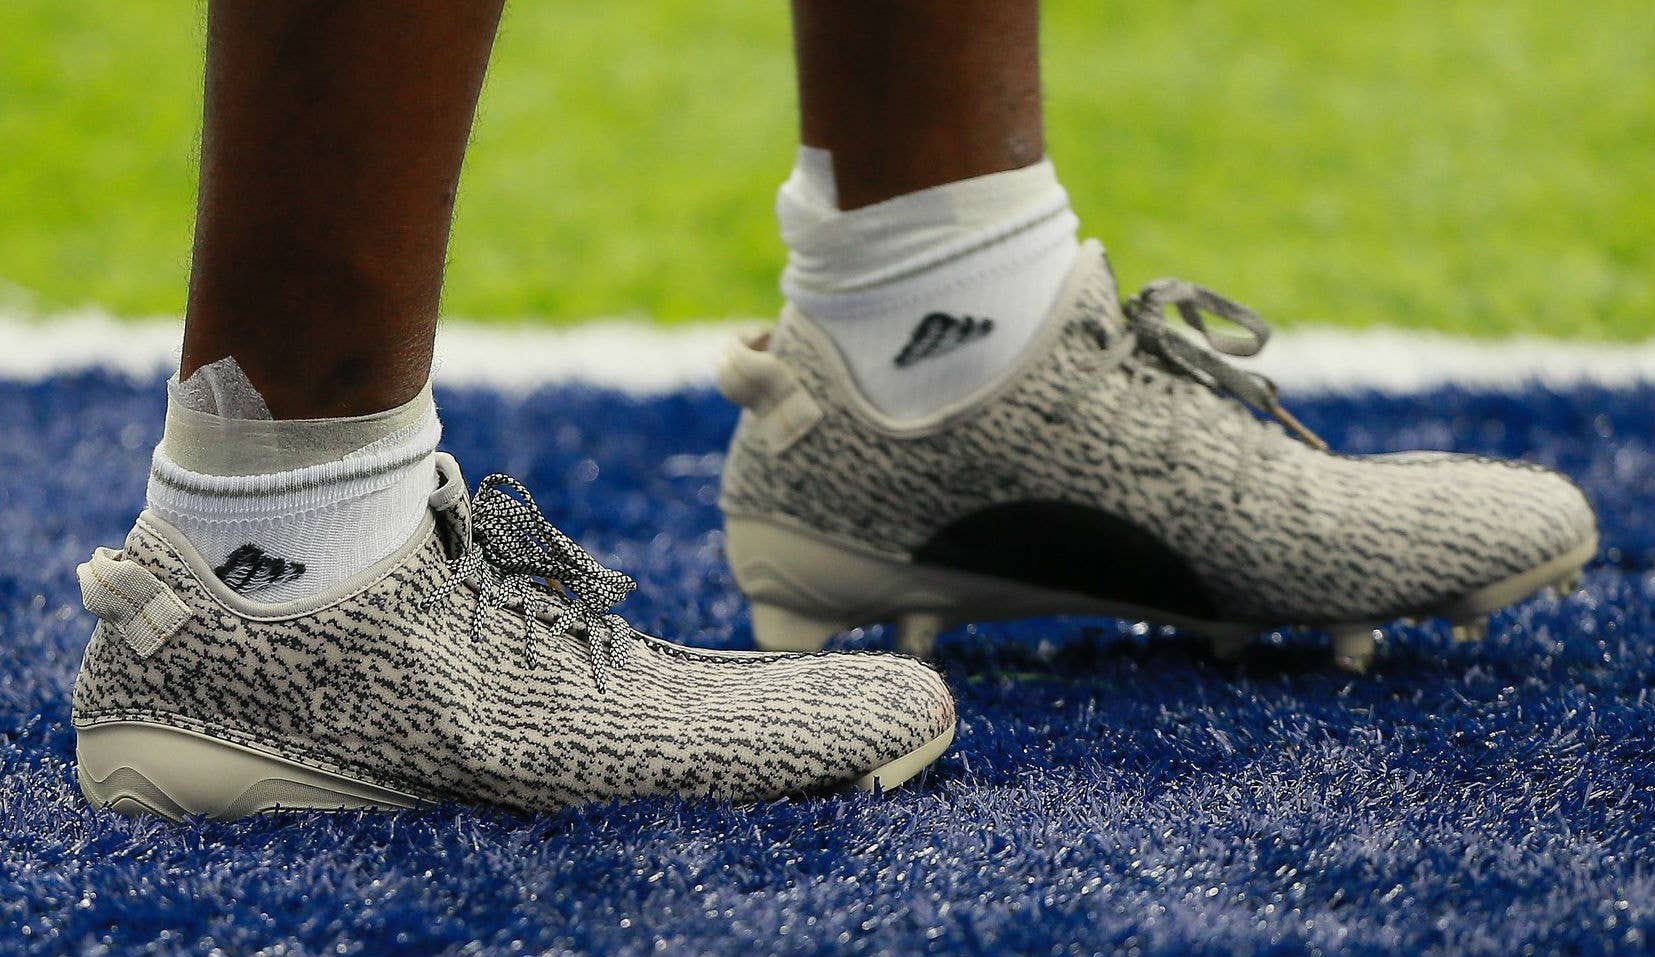 DeAndre Hopkins Plays in adidas Yeezy Cleats Game